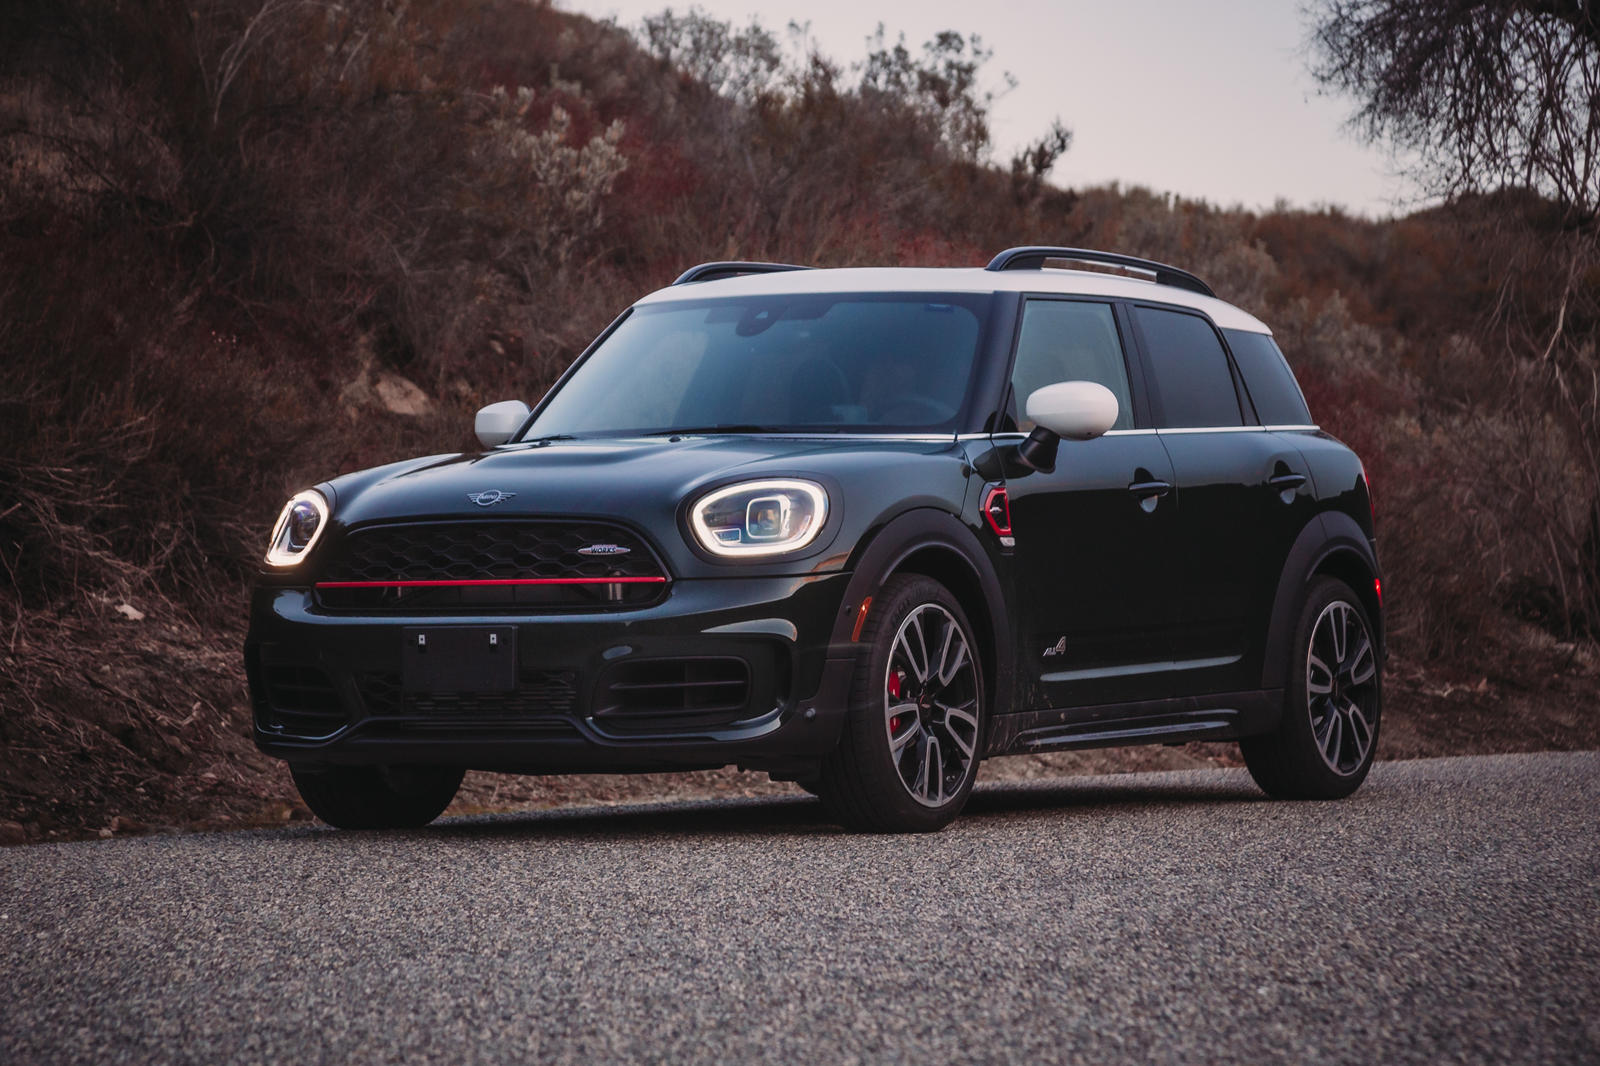 Mini Countryman Review, For Sale, Colours, Interior, Models & News